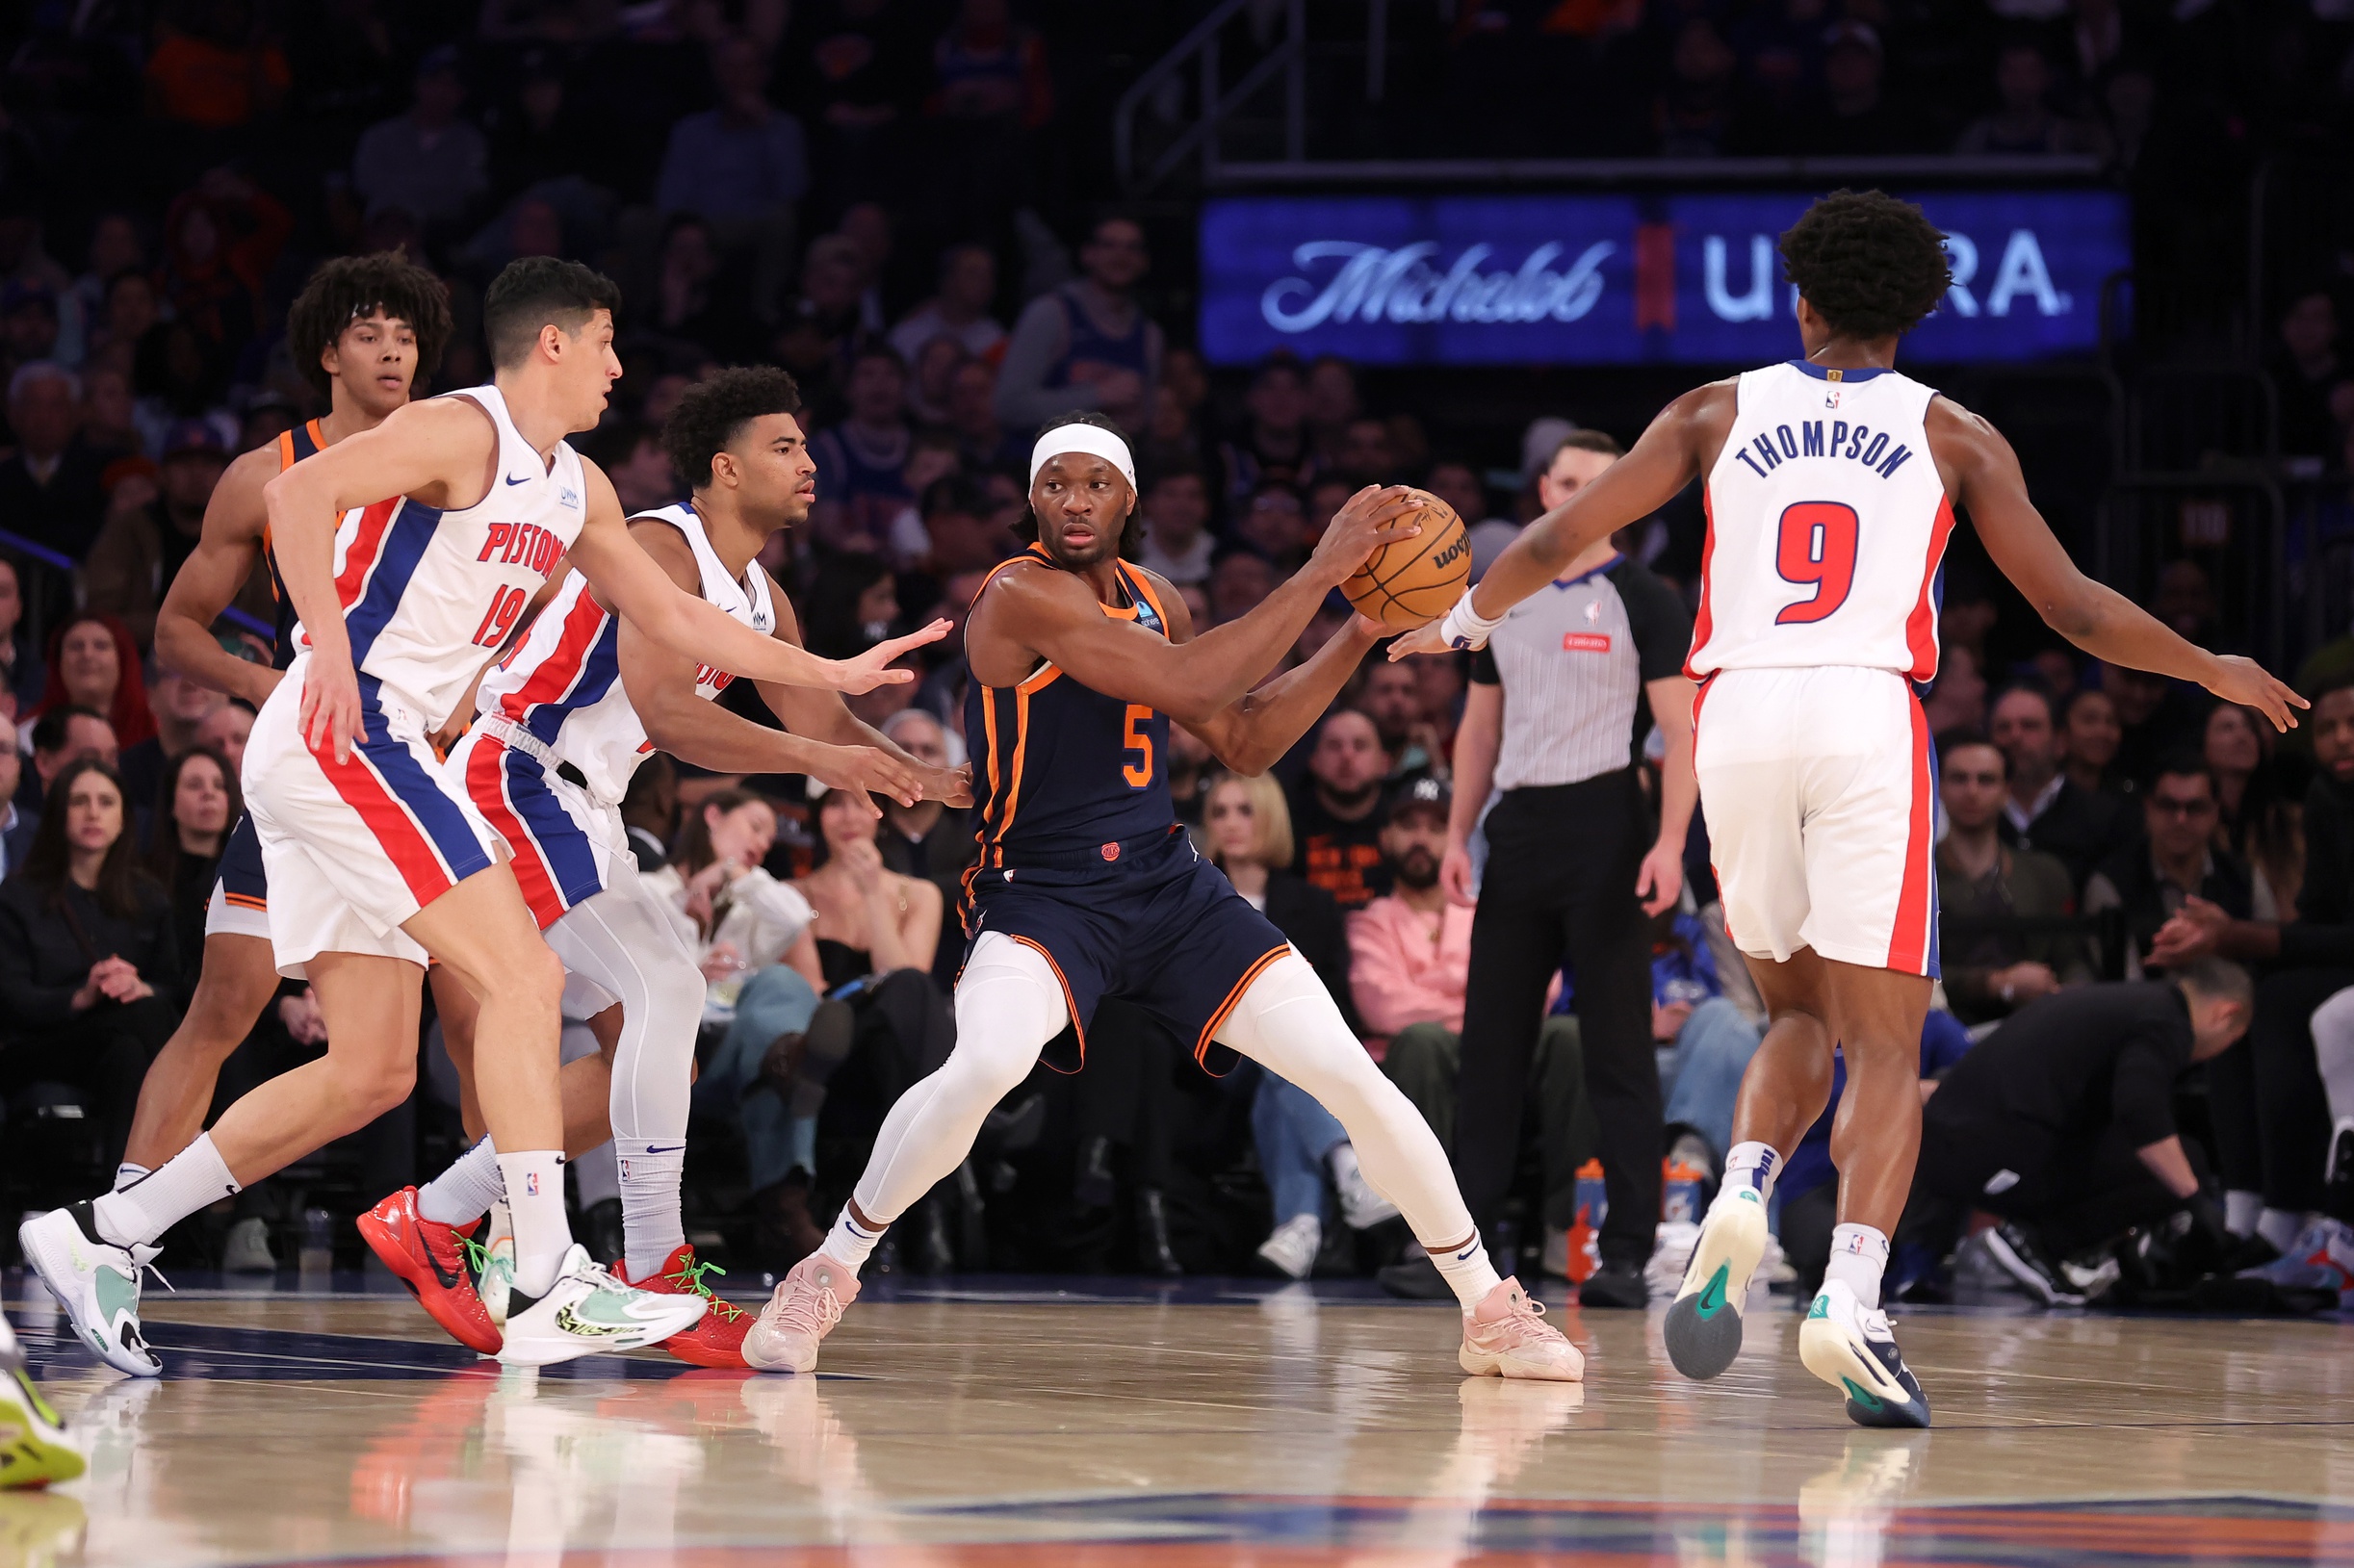 New York Knicks forward Precious Achiuwa (5) controls the ball against Detroit Pistons guard Quentin Grimes (24) and forwards Simone Fontecchio (19) and Ausar Thompson (9) during the first quarter at Madison Square Garden.